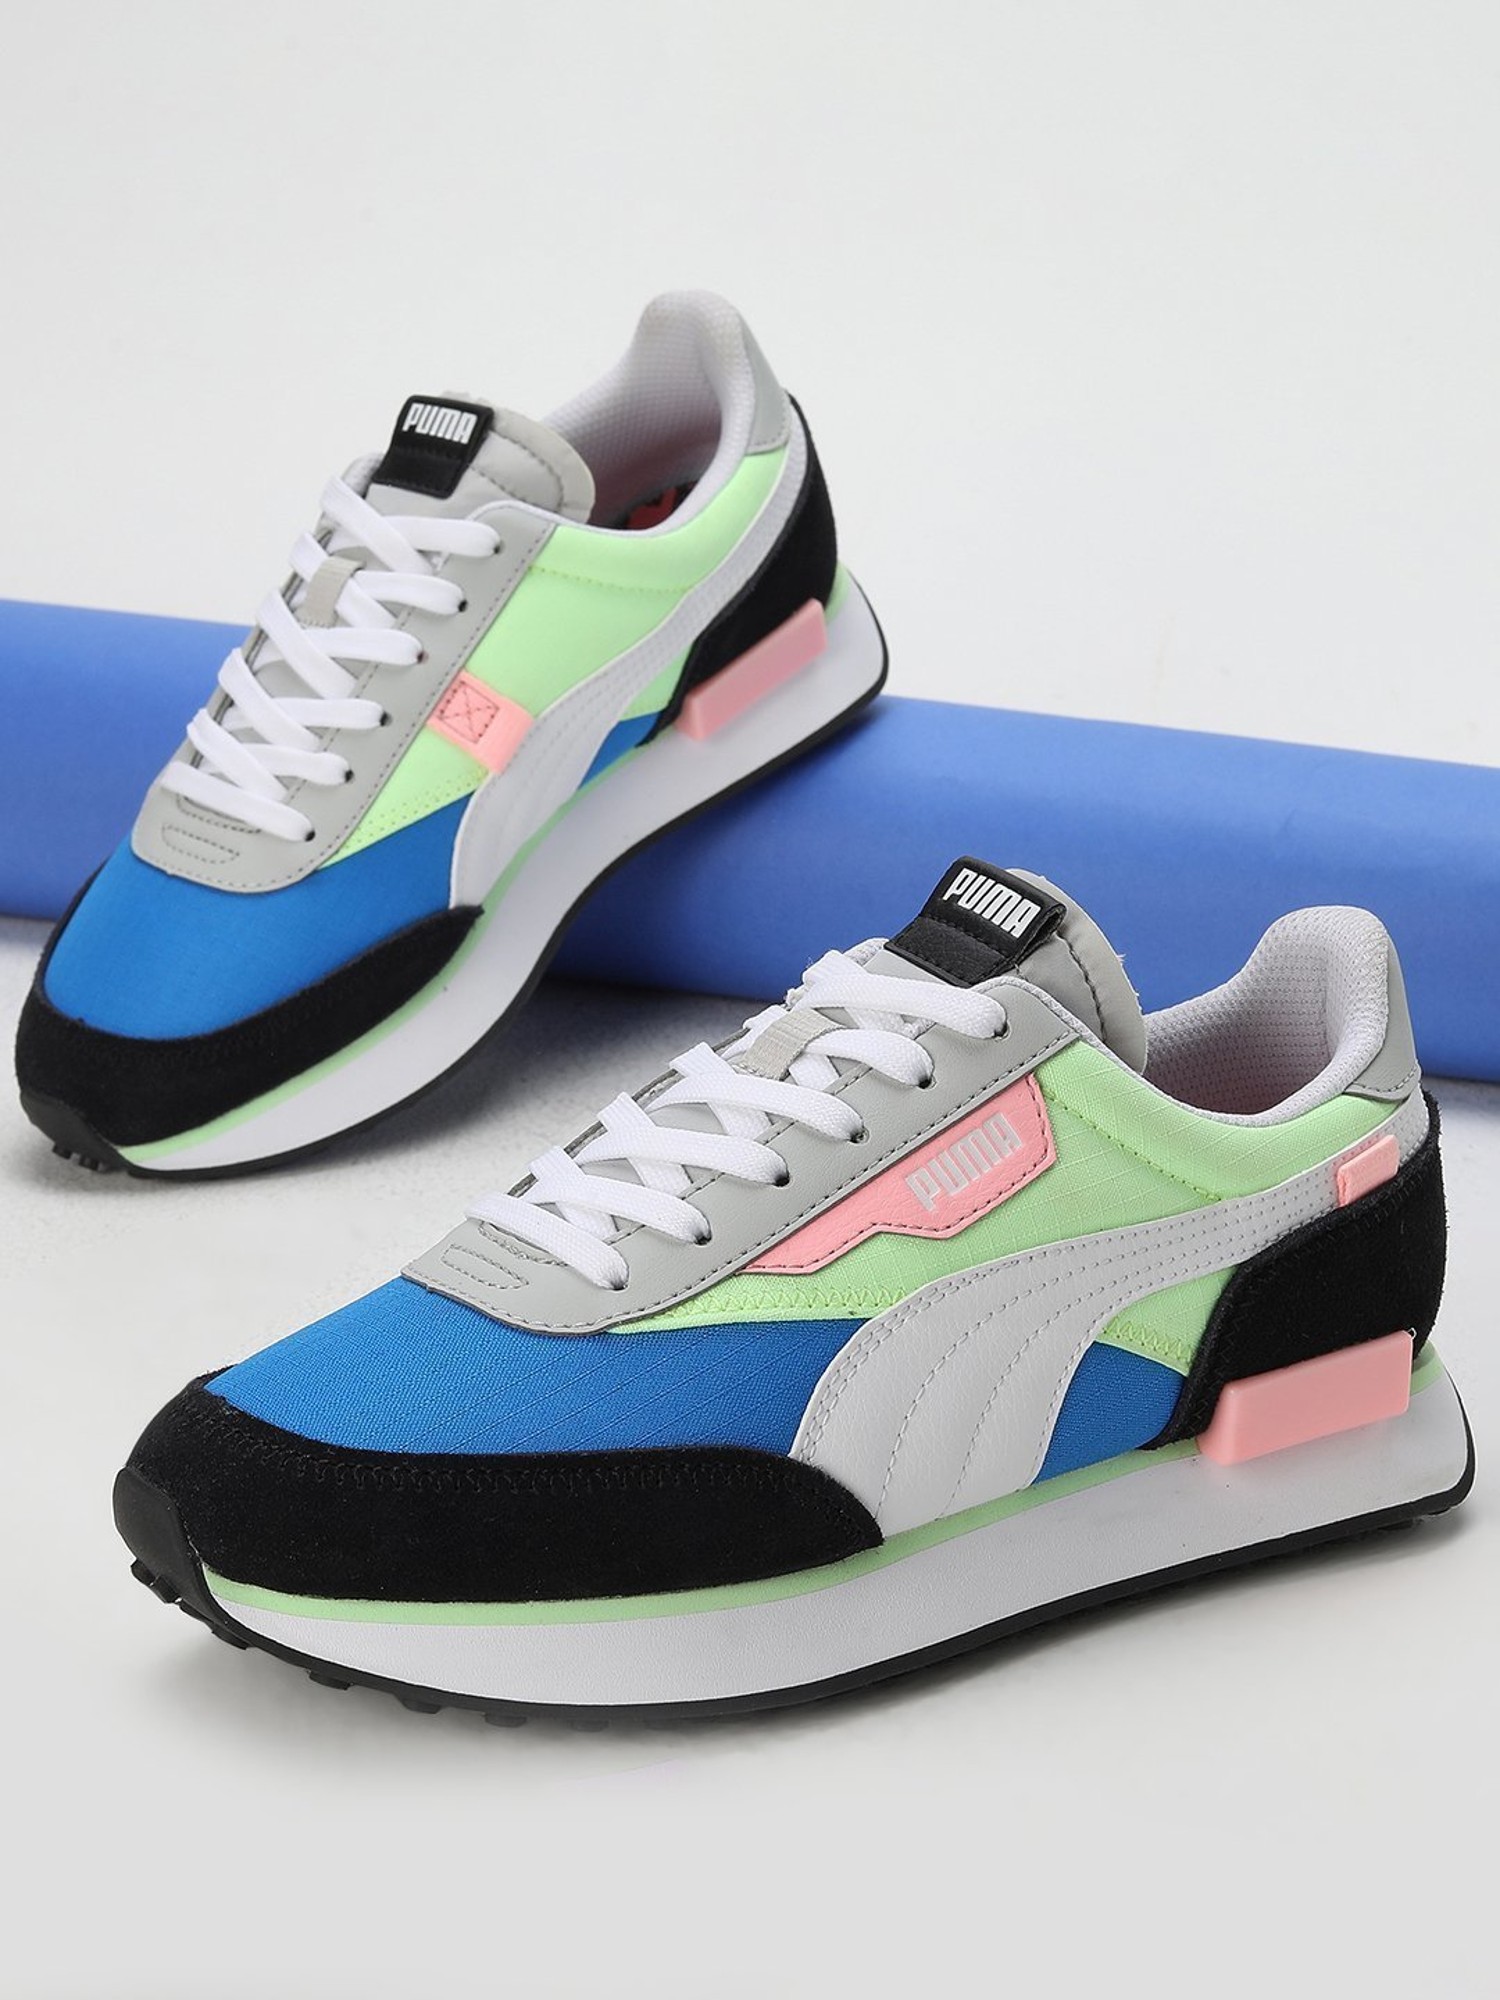 Multicolor Womens Cruise Rider Sneaker | Puma | Rack Room Shoes